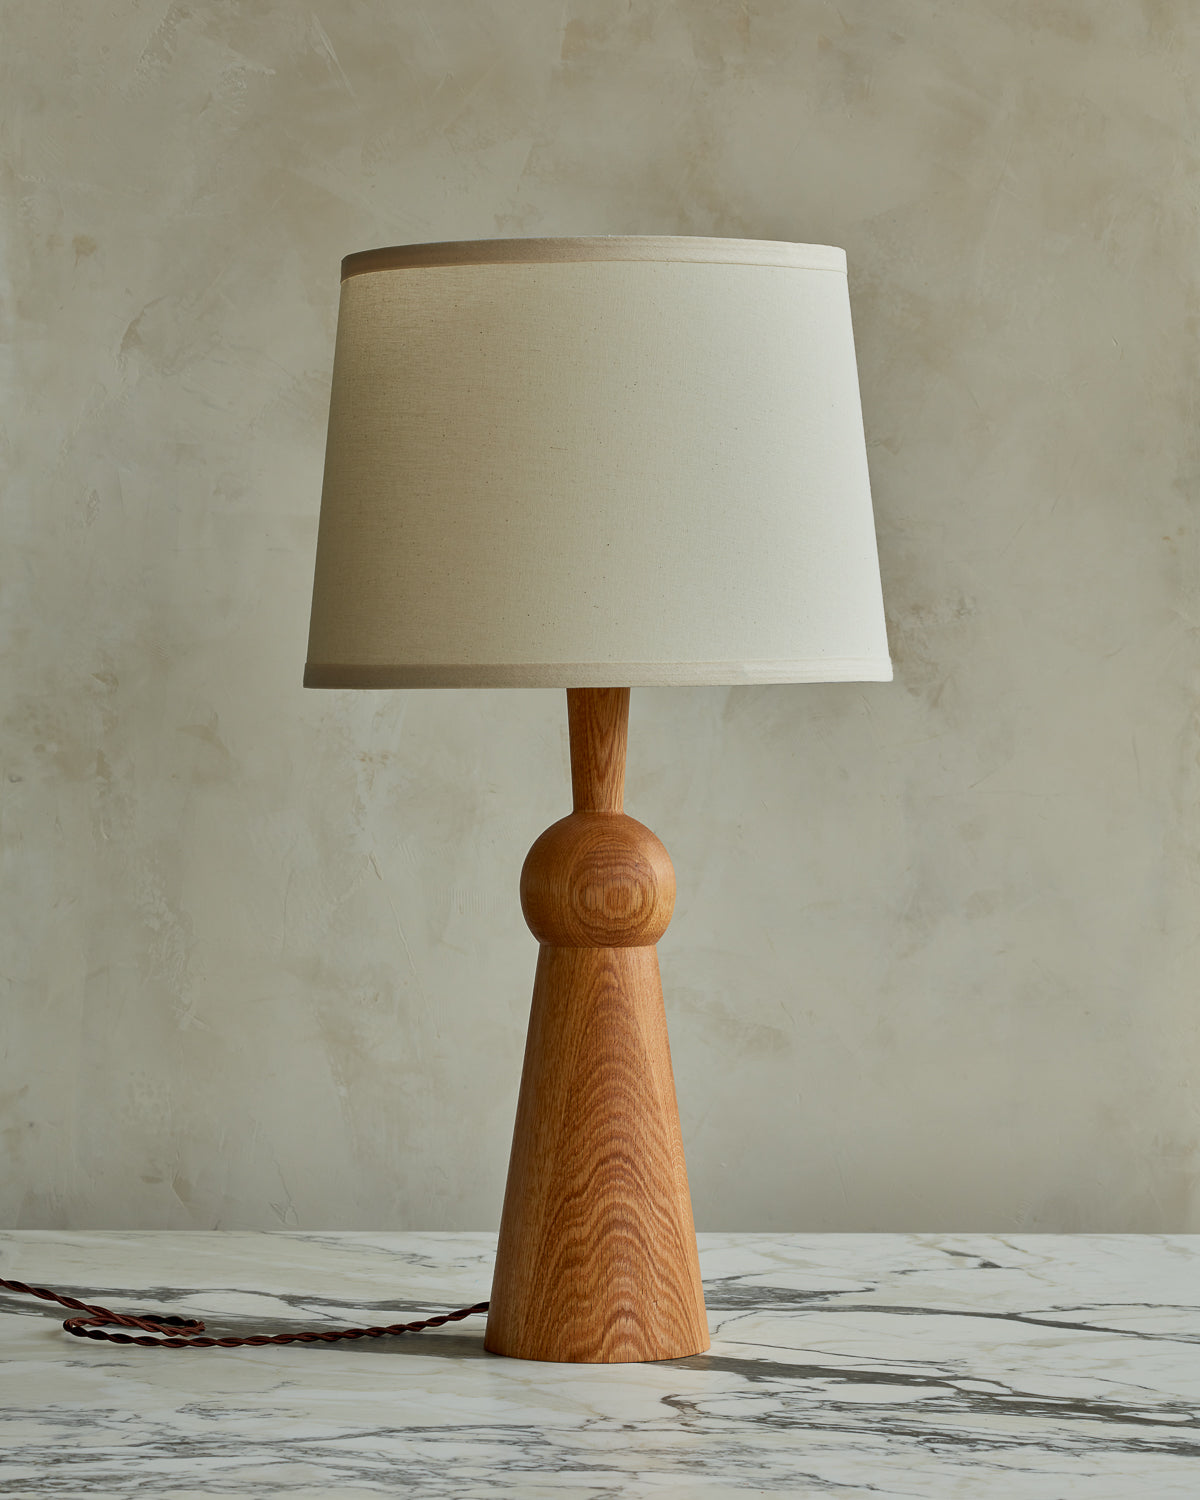 Natural red oak solid wood table lamp with gently tapered body and ivory linen shade